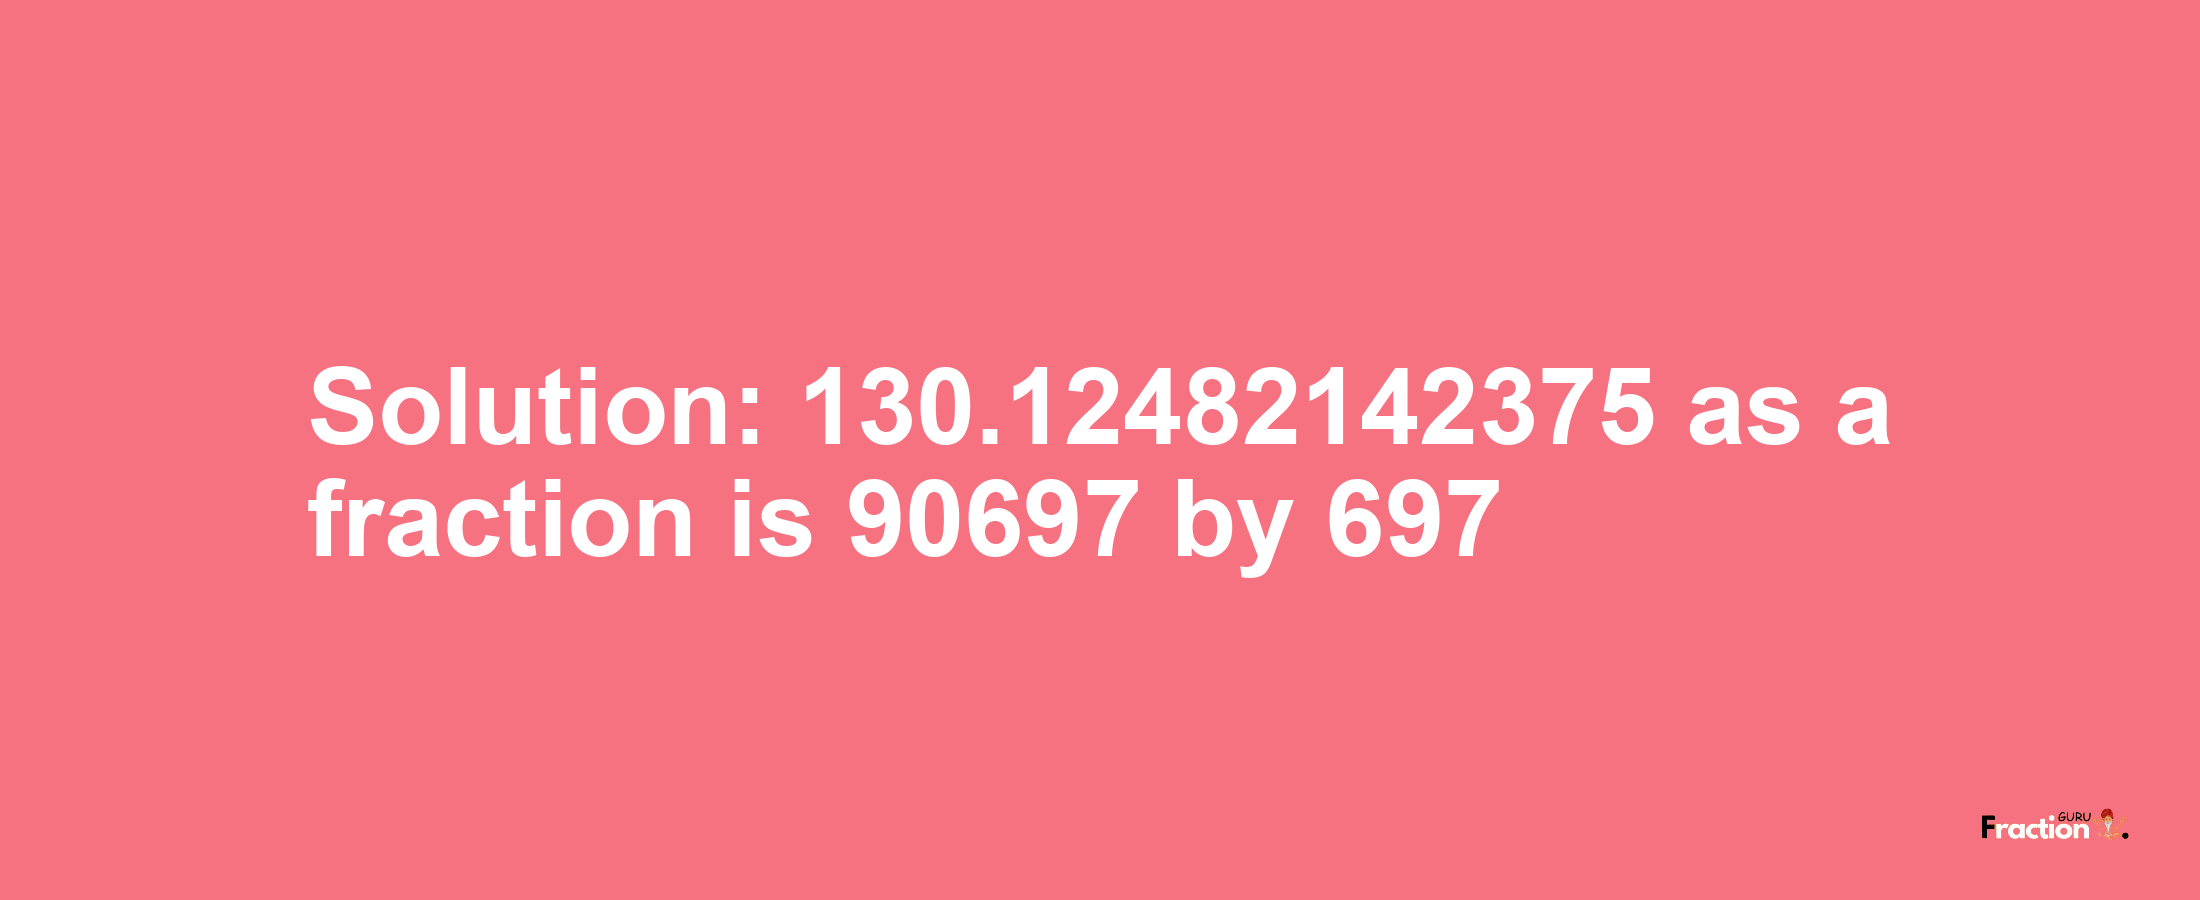 Solution:130.12482142375 as a fraction is 90697/697